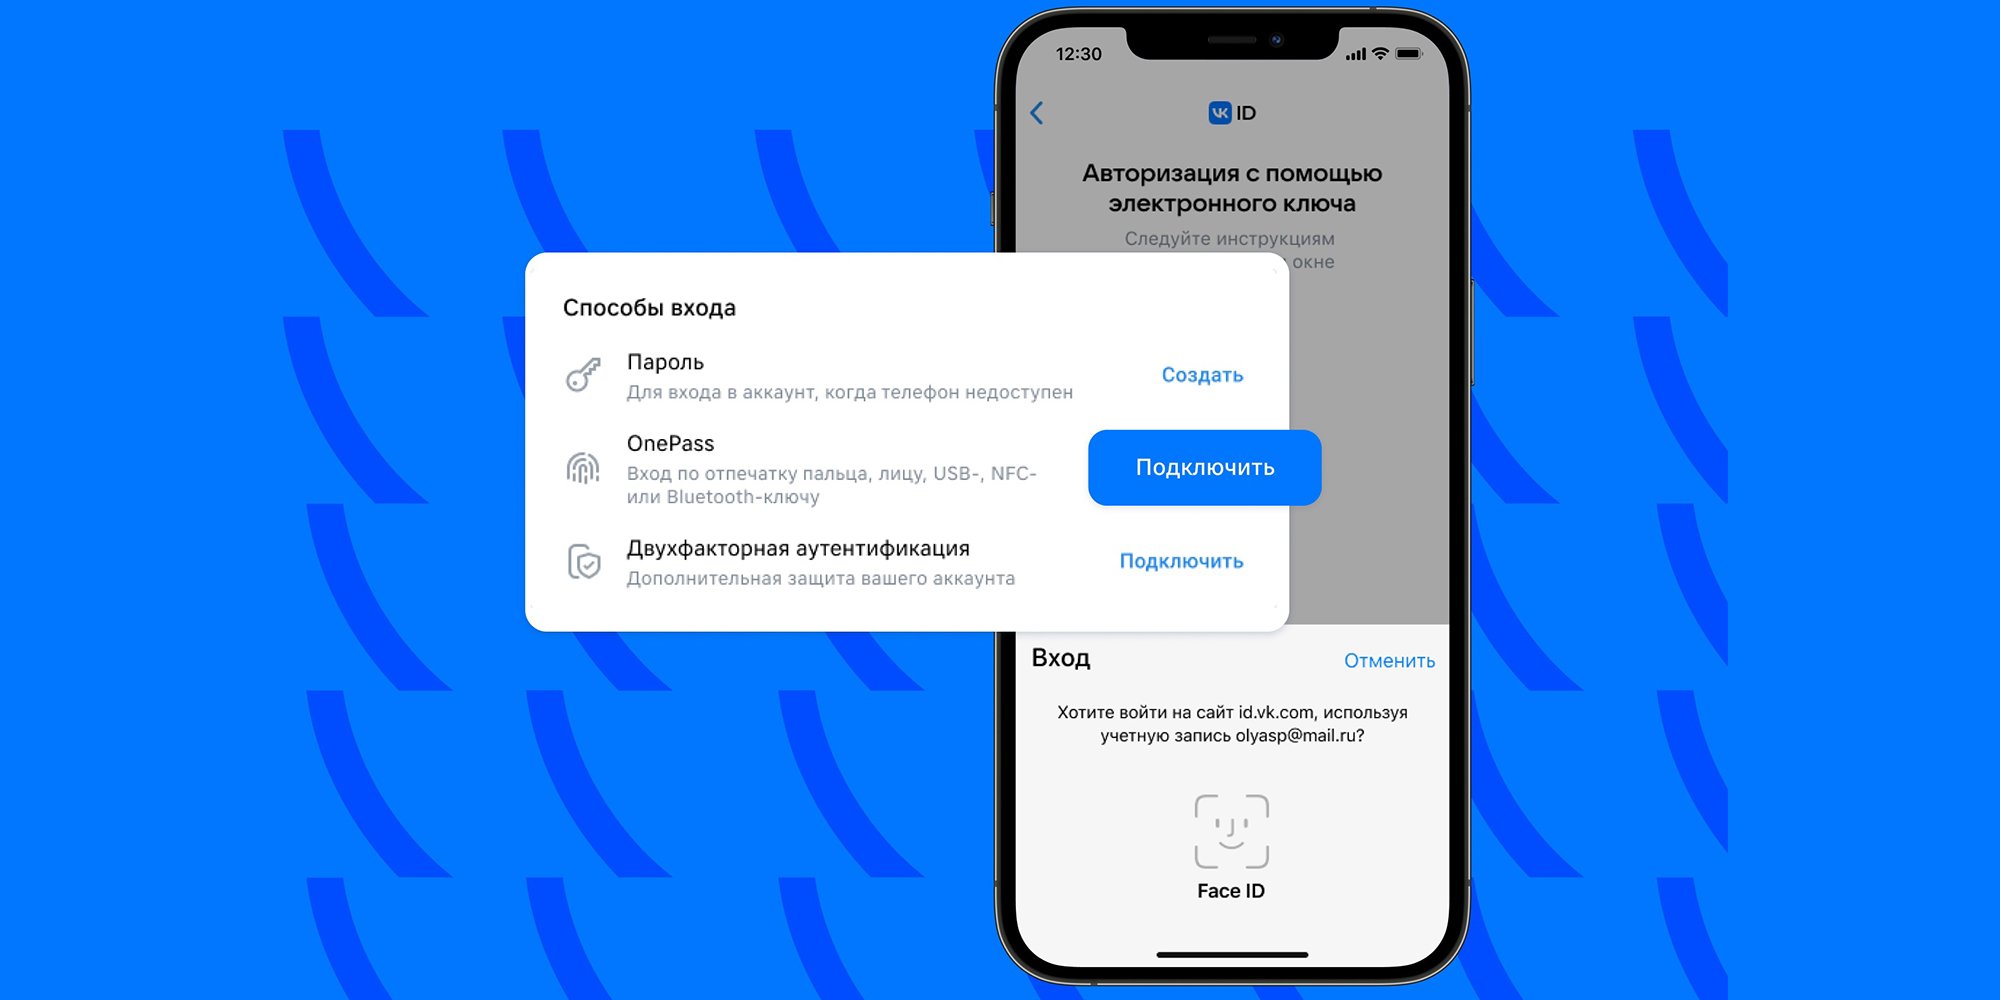 VK launches OnePass for authorization without a password